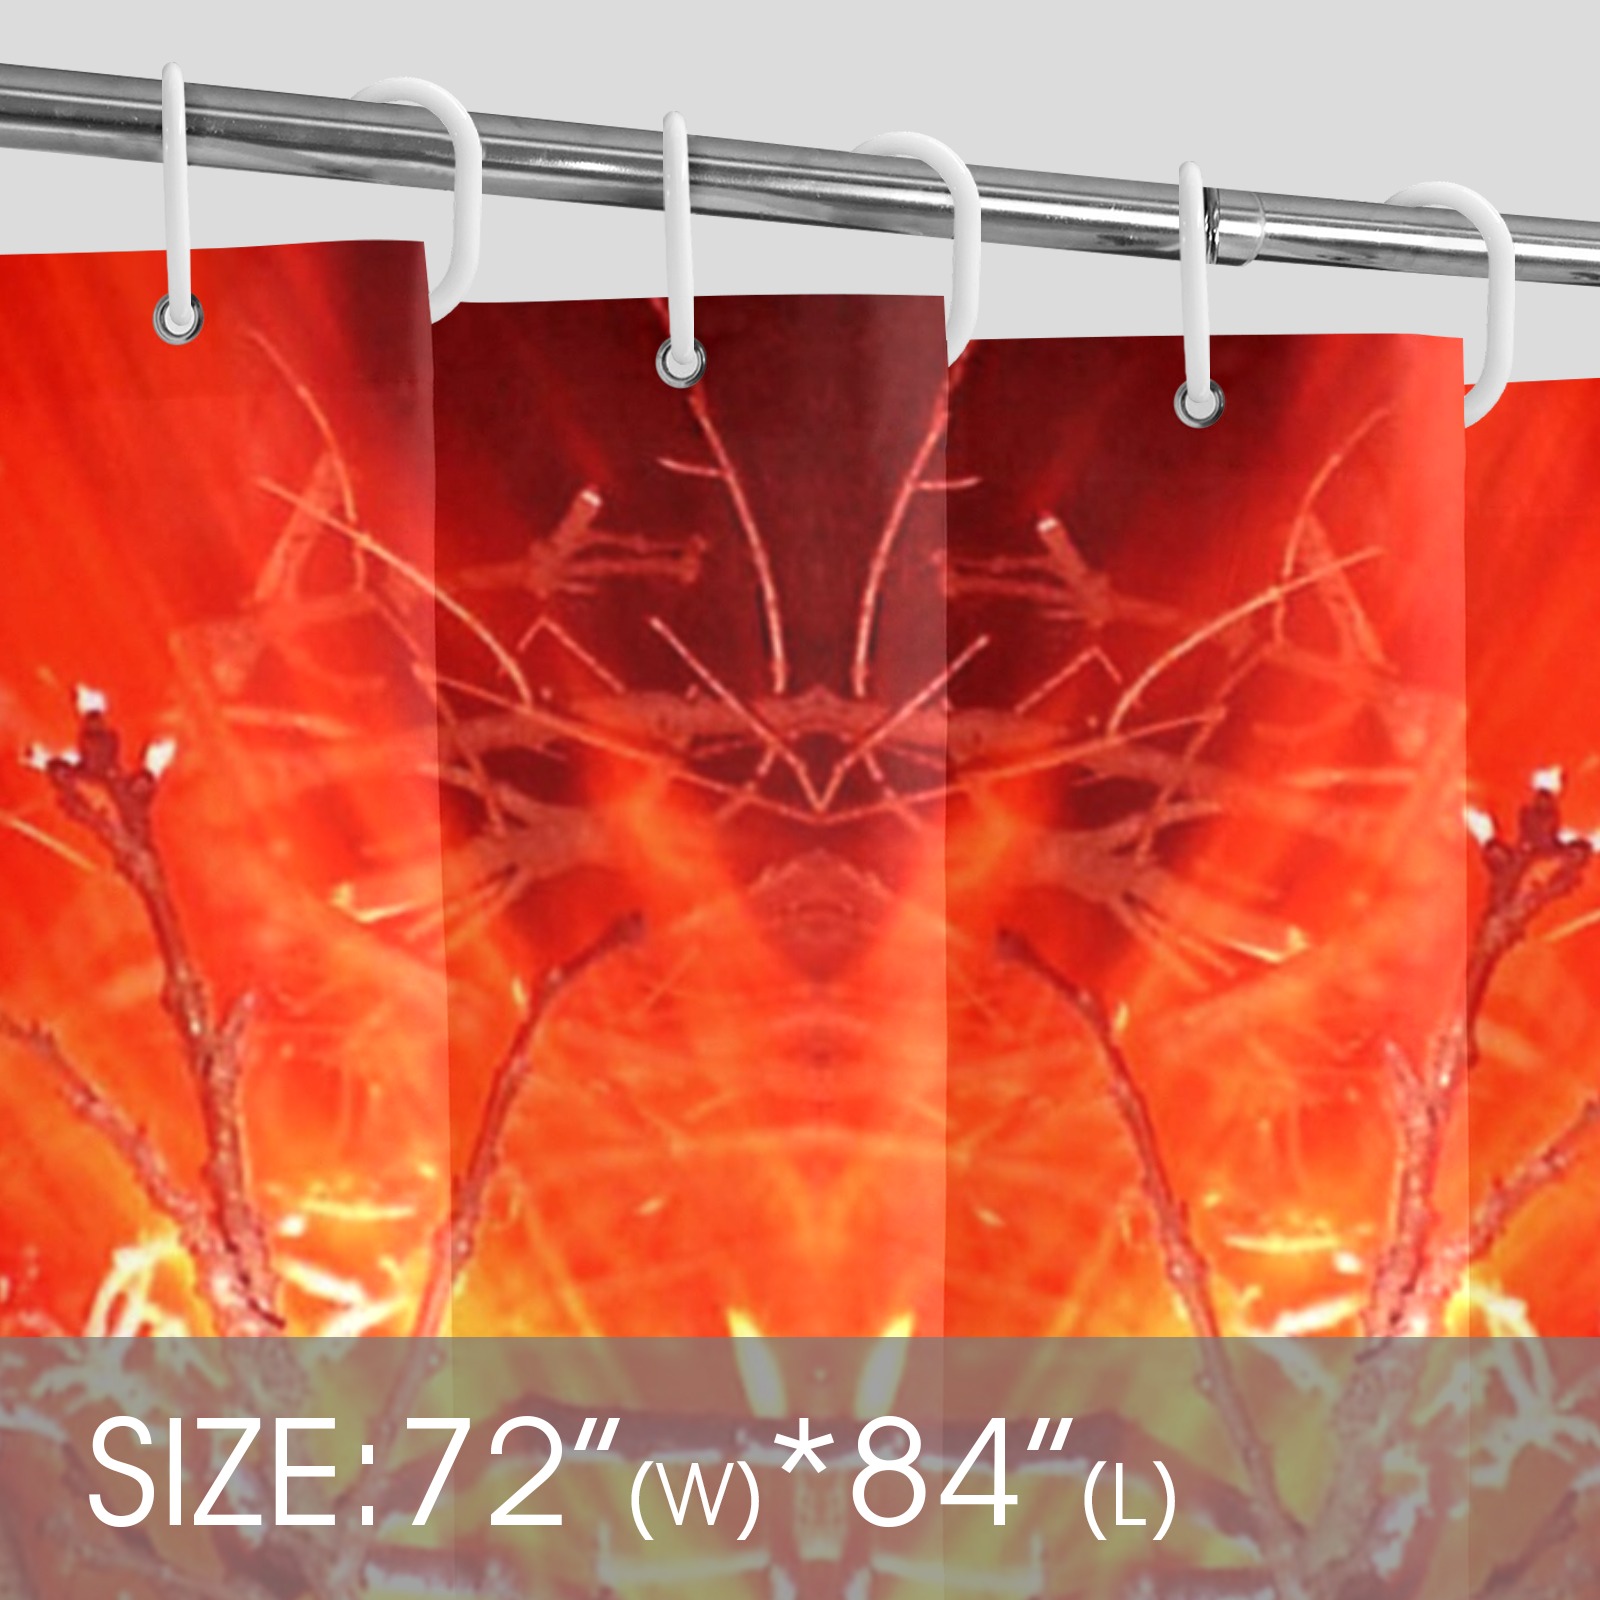 Abstract Fire Shower Curtain 72"x84"